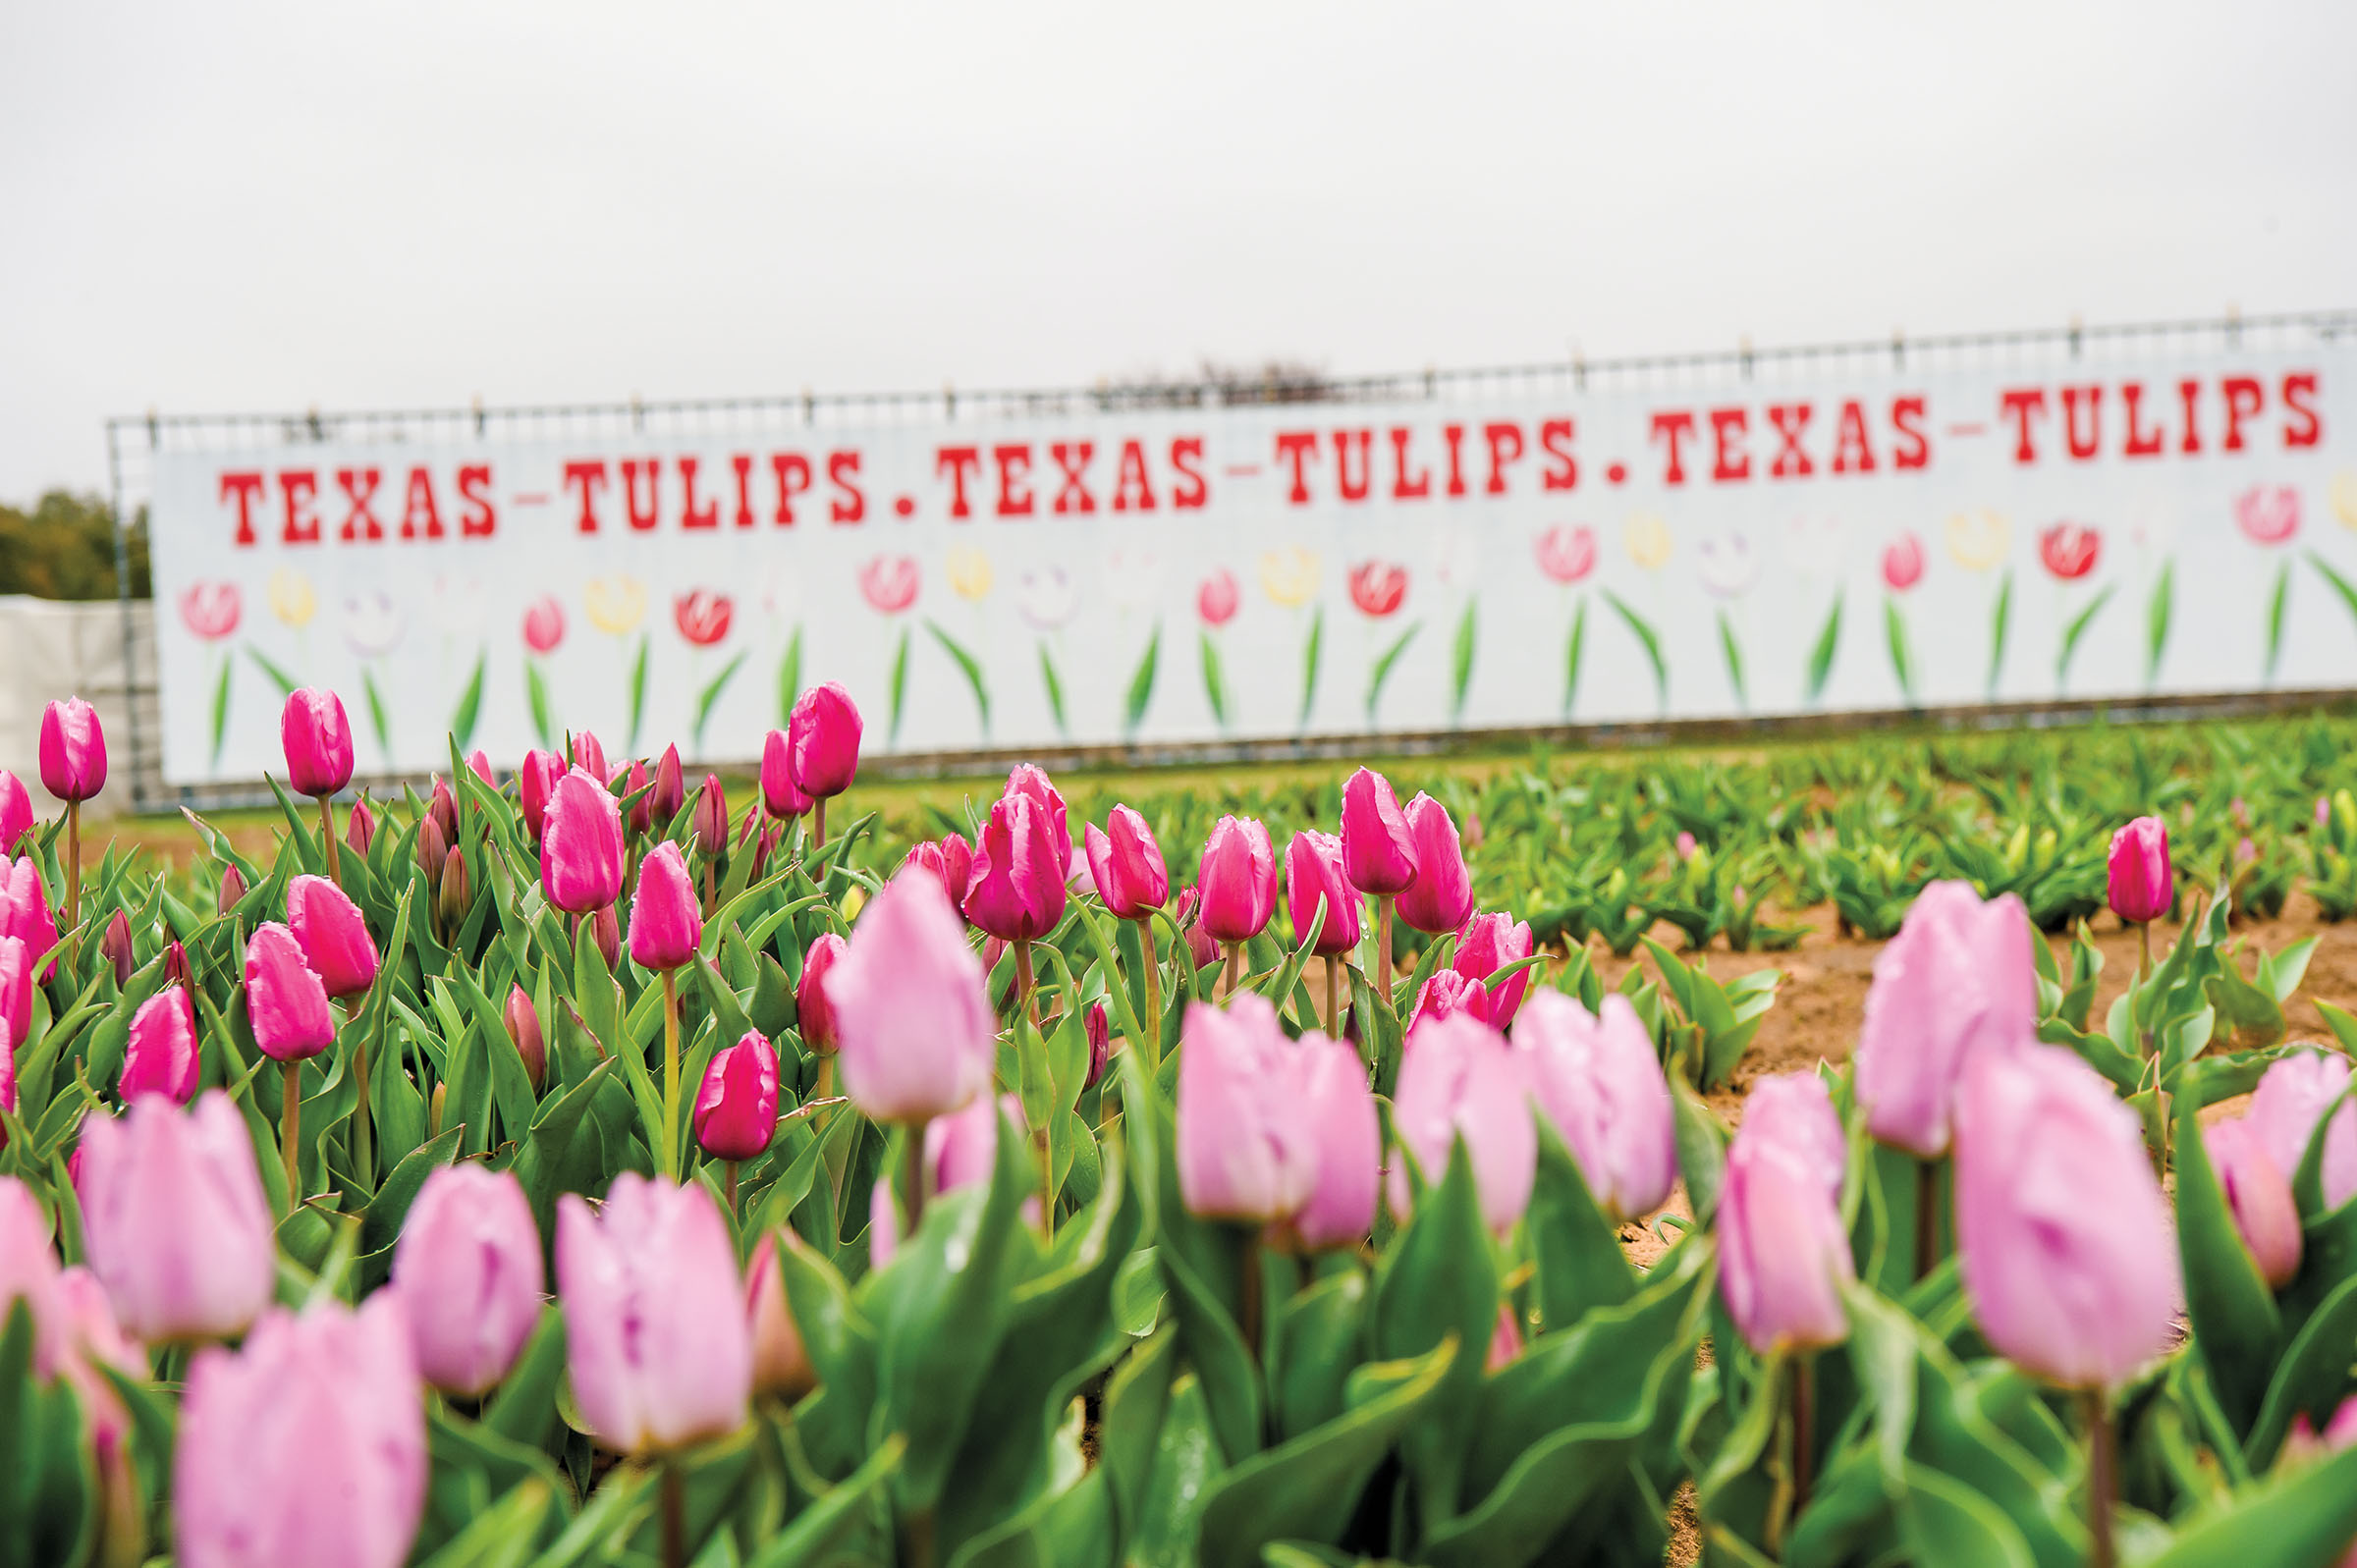 Bright pink tulips in a green field in front of a building with a mural reading "Texas tulips" several times